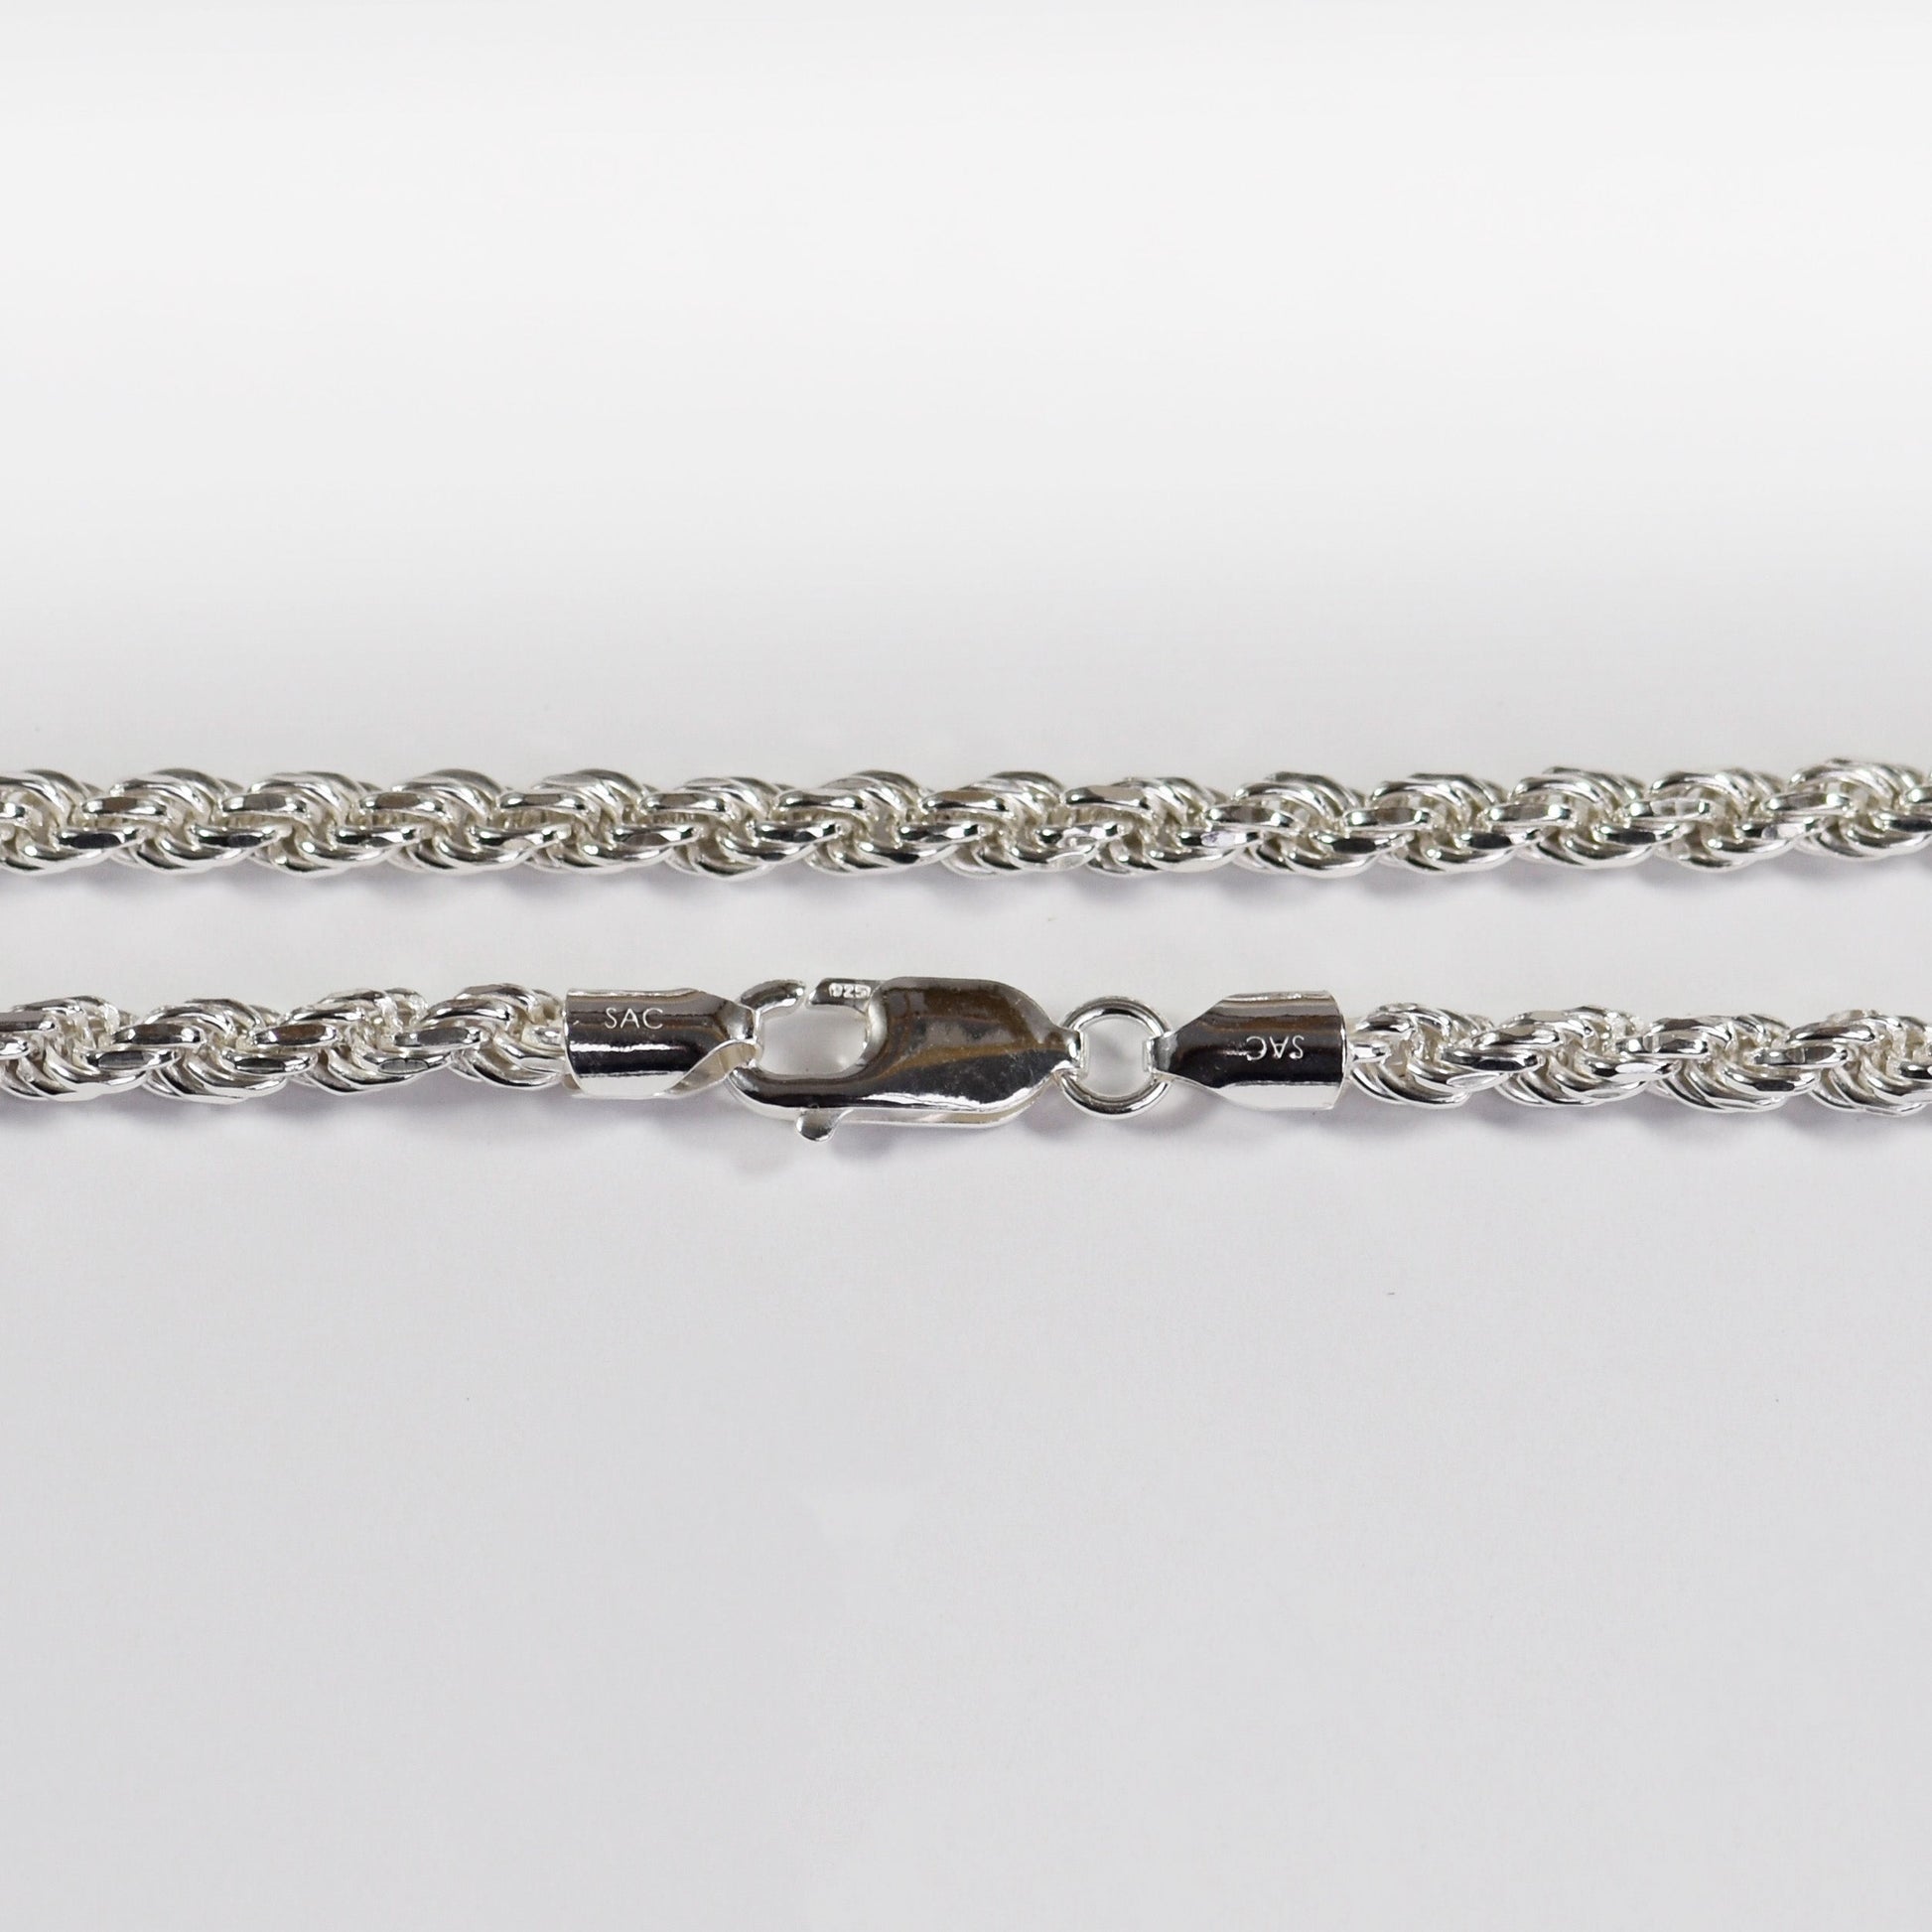 Diamond Cut Rope Necklace - 3.7 mm - Sterling Silver